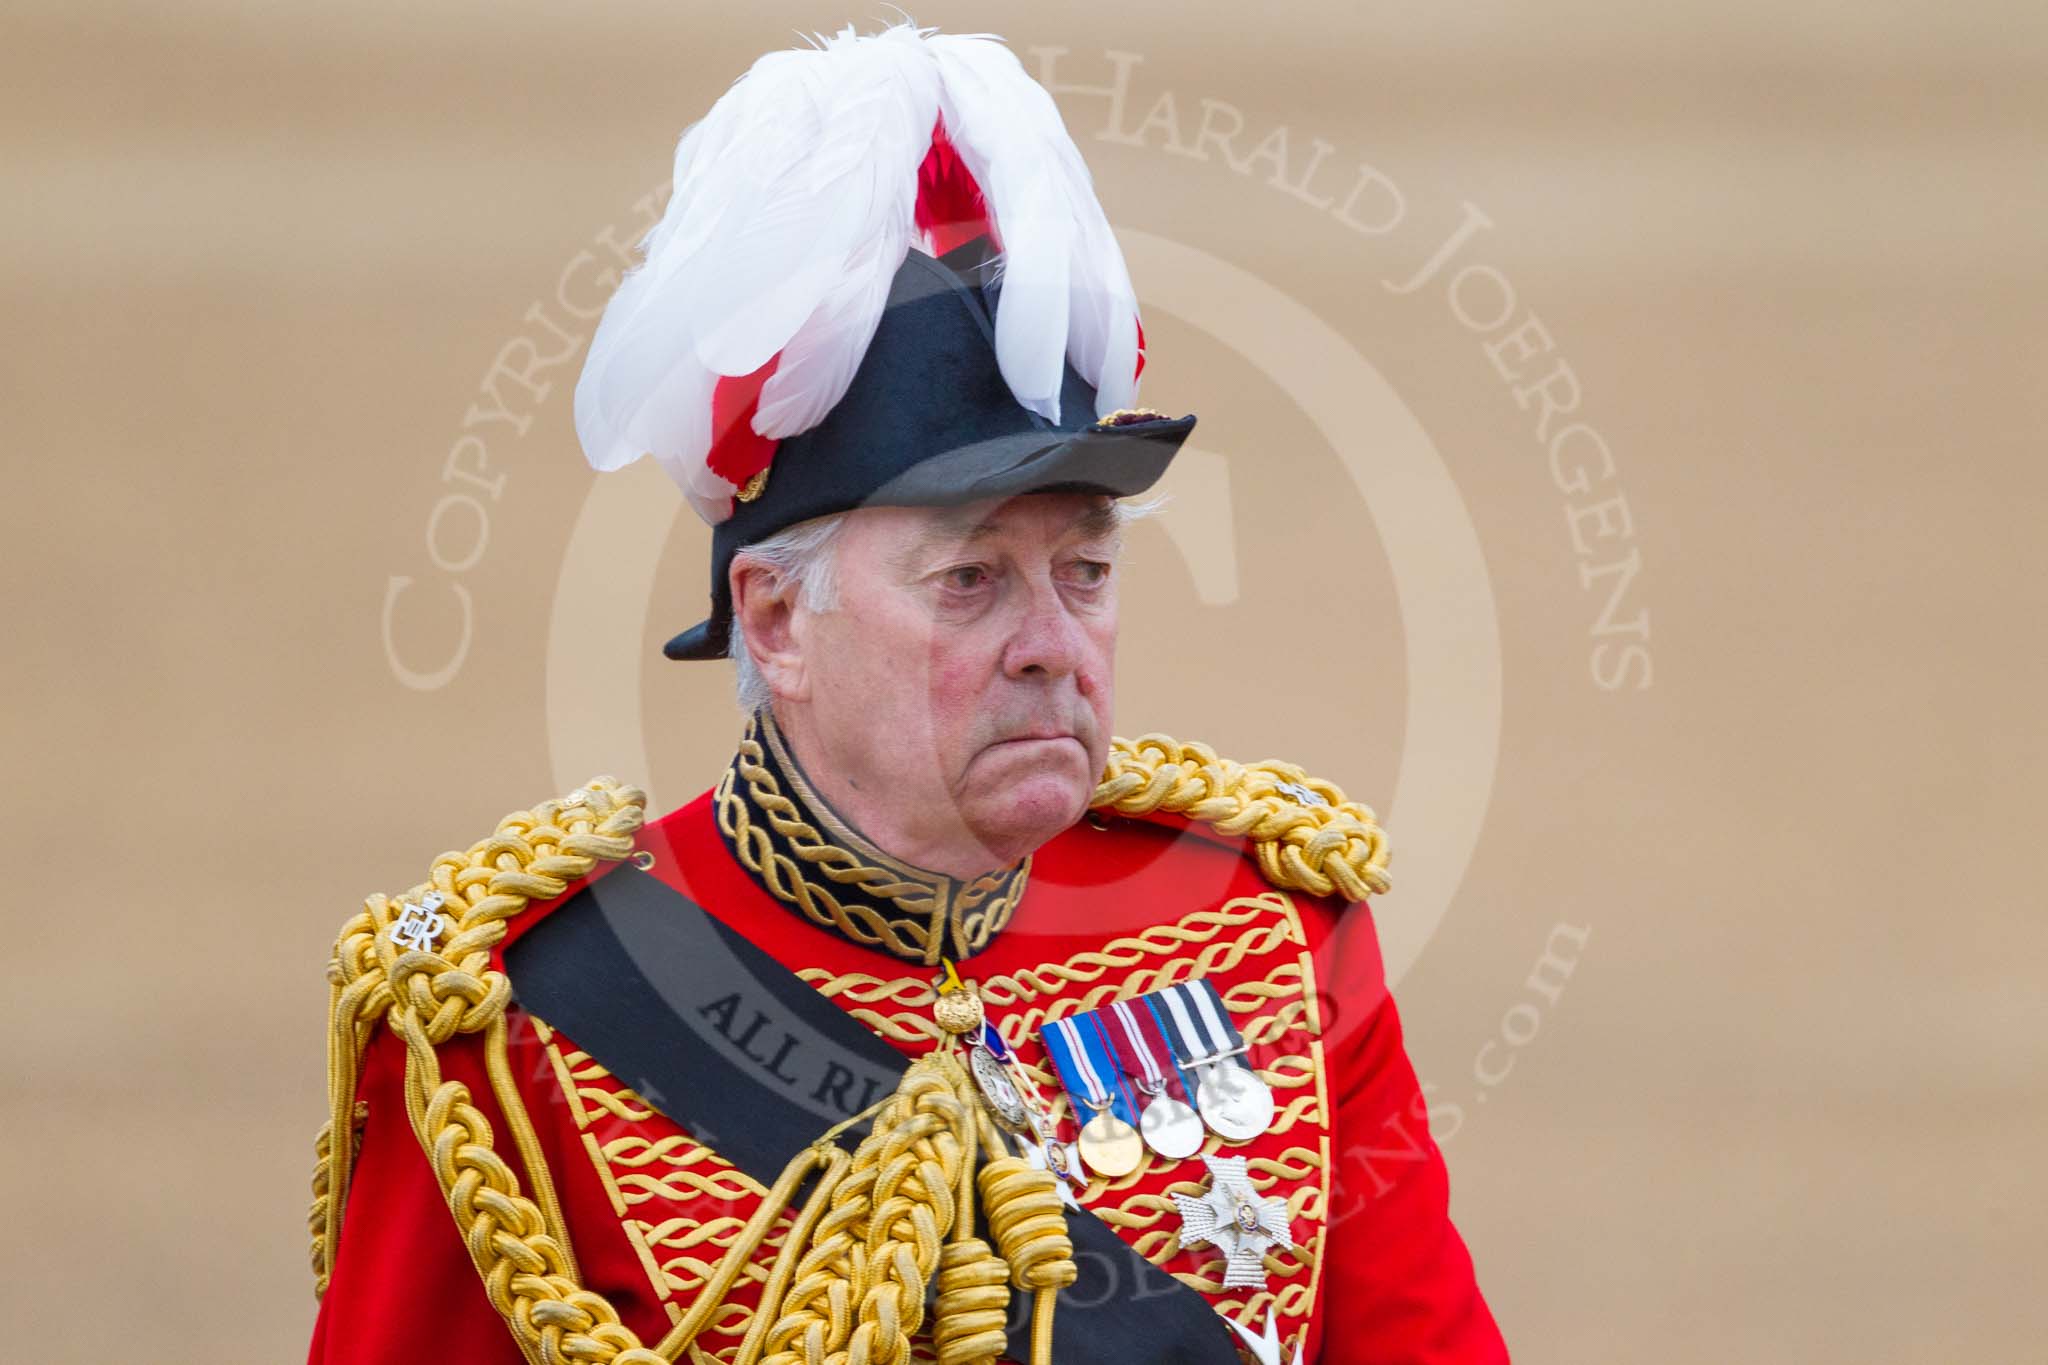 Trooping the Colour 2015. Image #314, 13 June 2015 11:05 Horse Guards Parade, London, UK